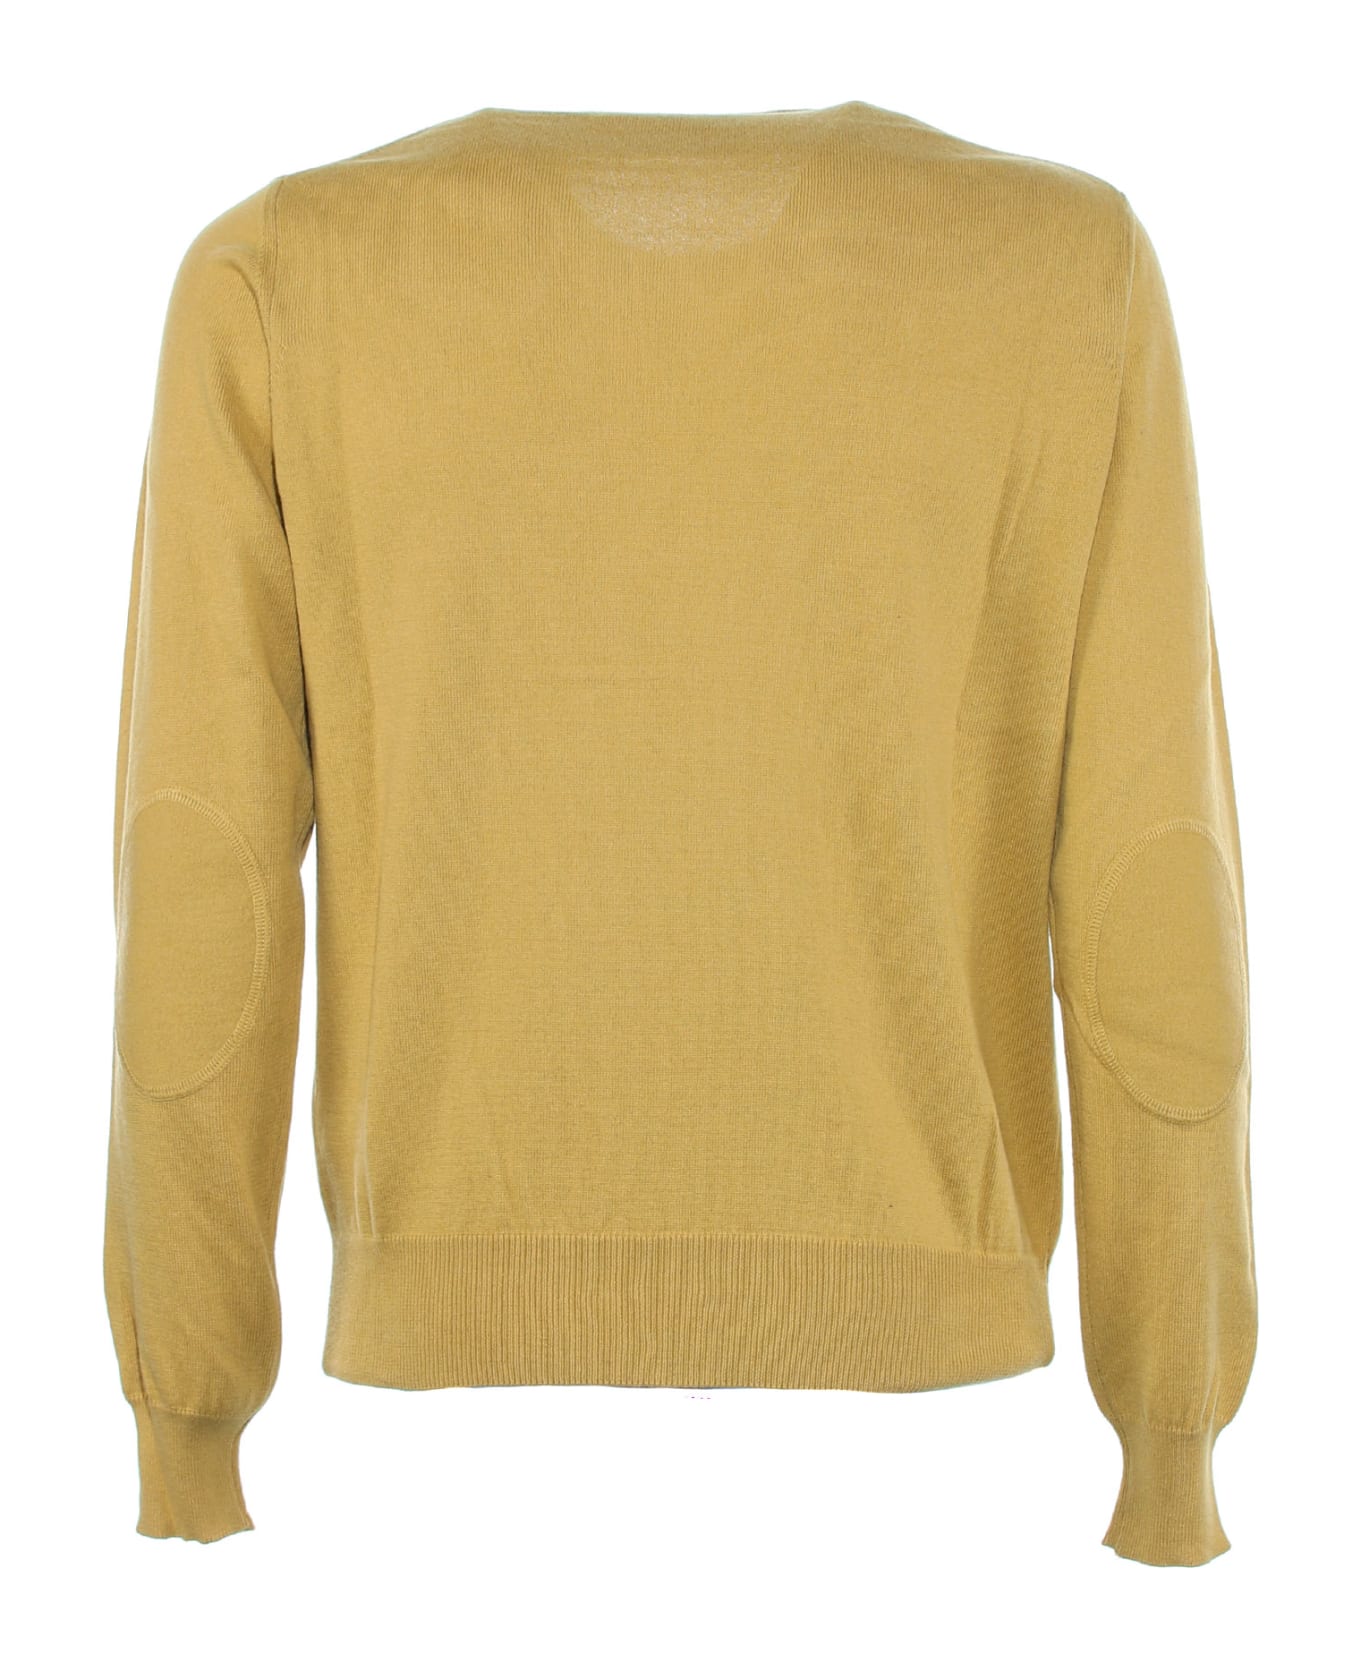 Peuterey Sweater With Elbow Patches - OCRA